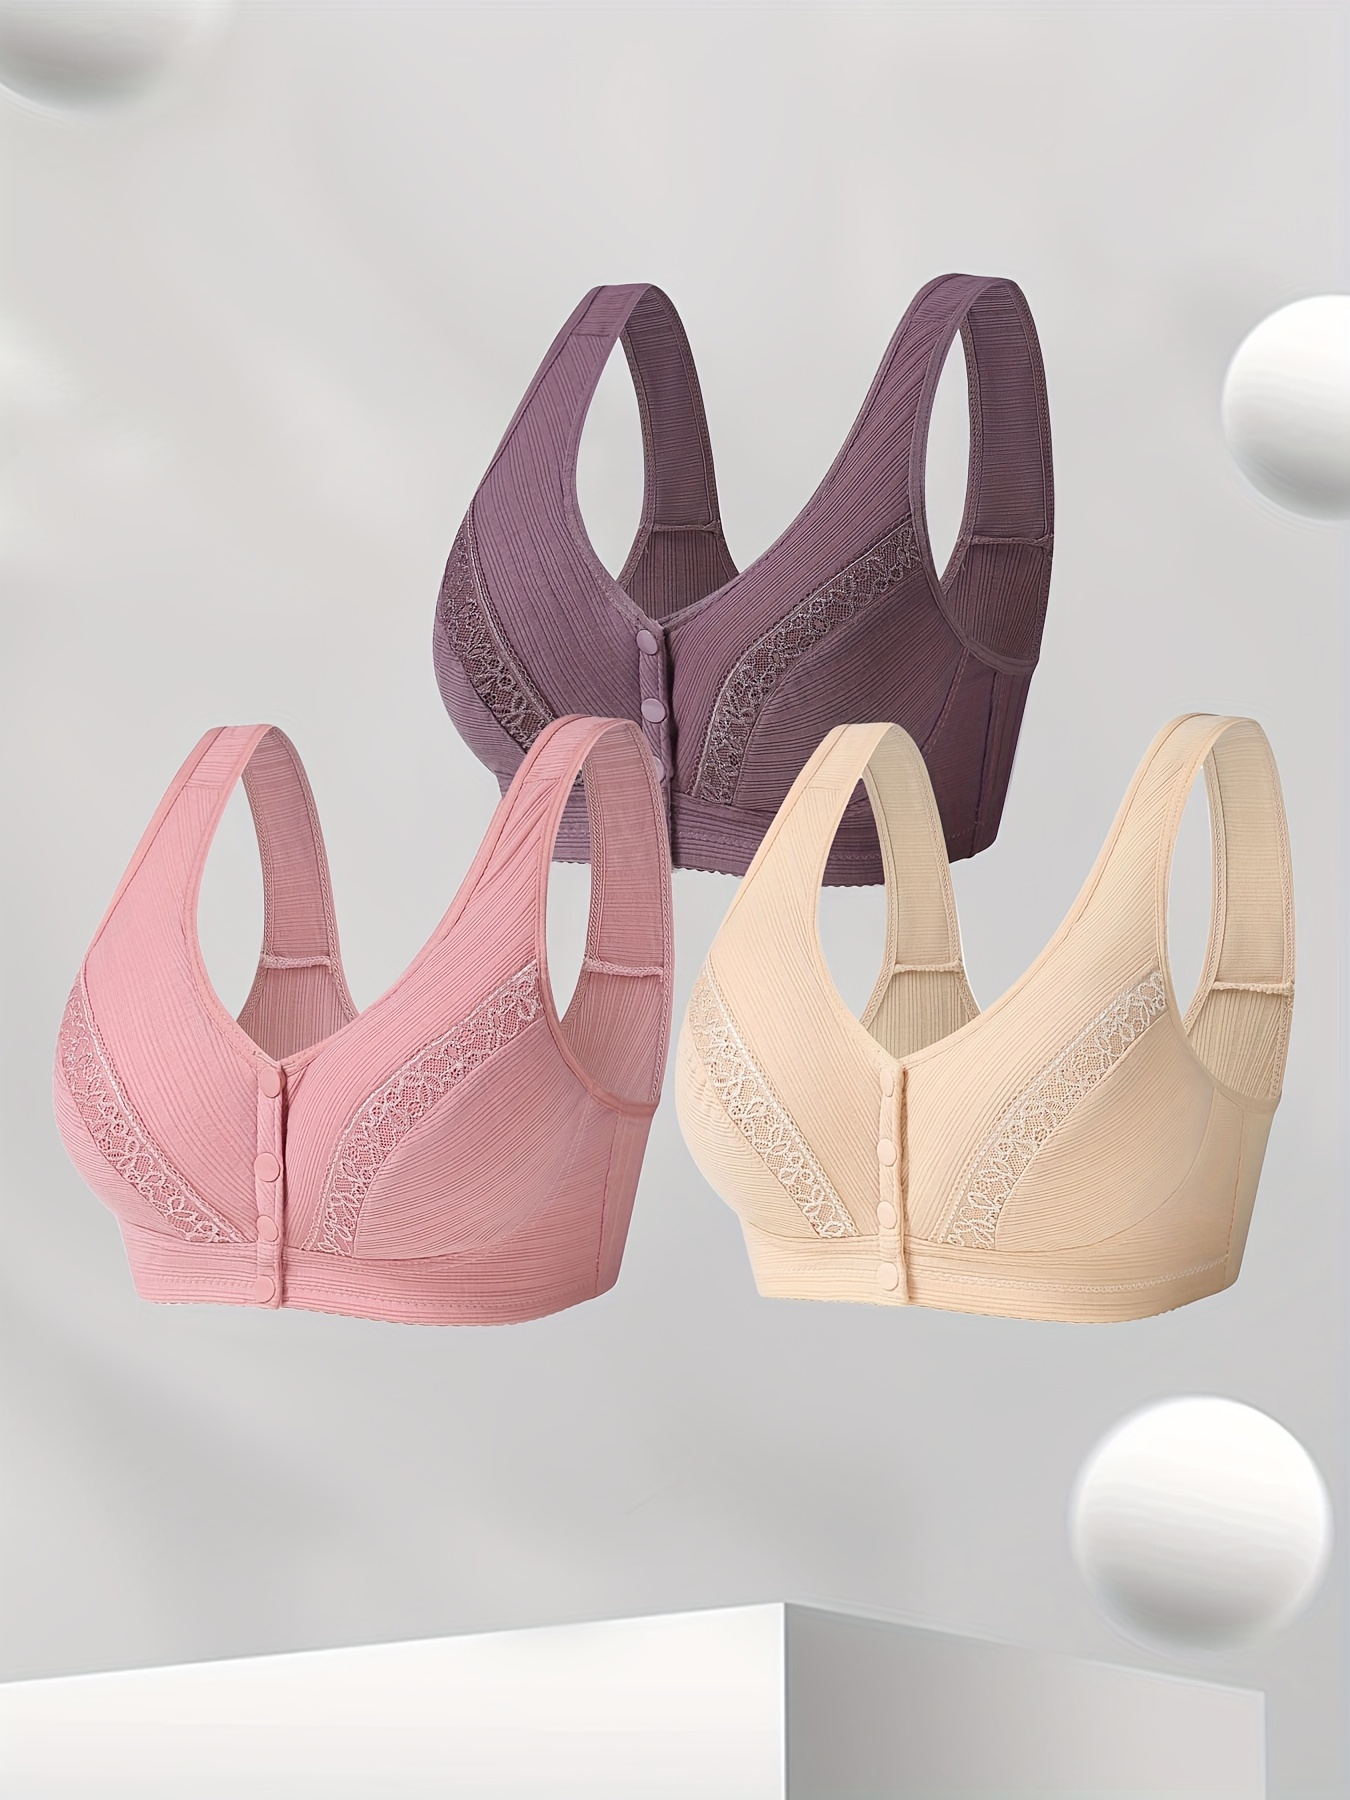 2pcs Women's Front Closure Bra Convenient Snap Sleep Bra Comfortable Easy  Close Sports Bras With Padded For Middle Aged